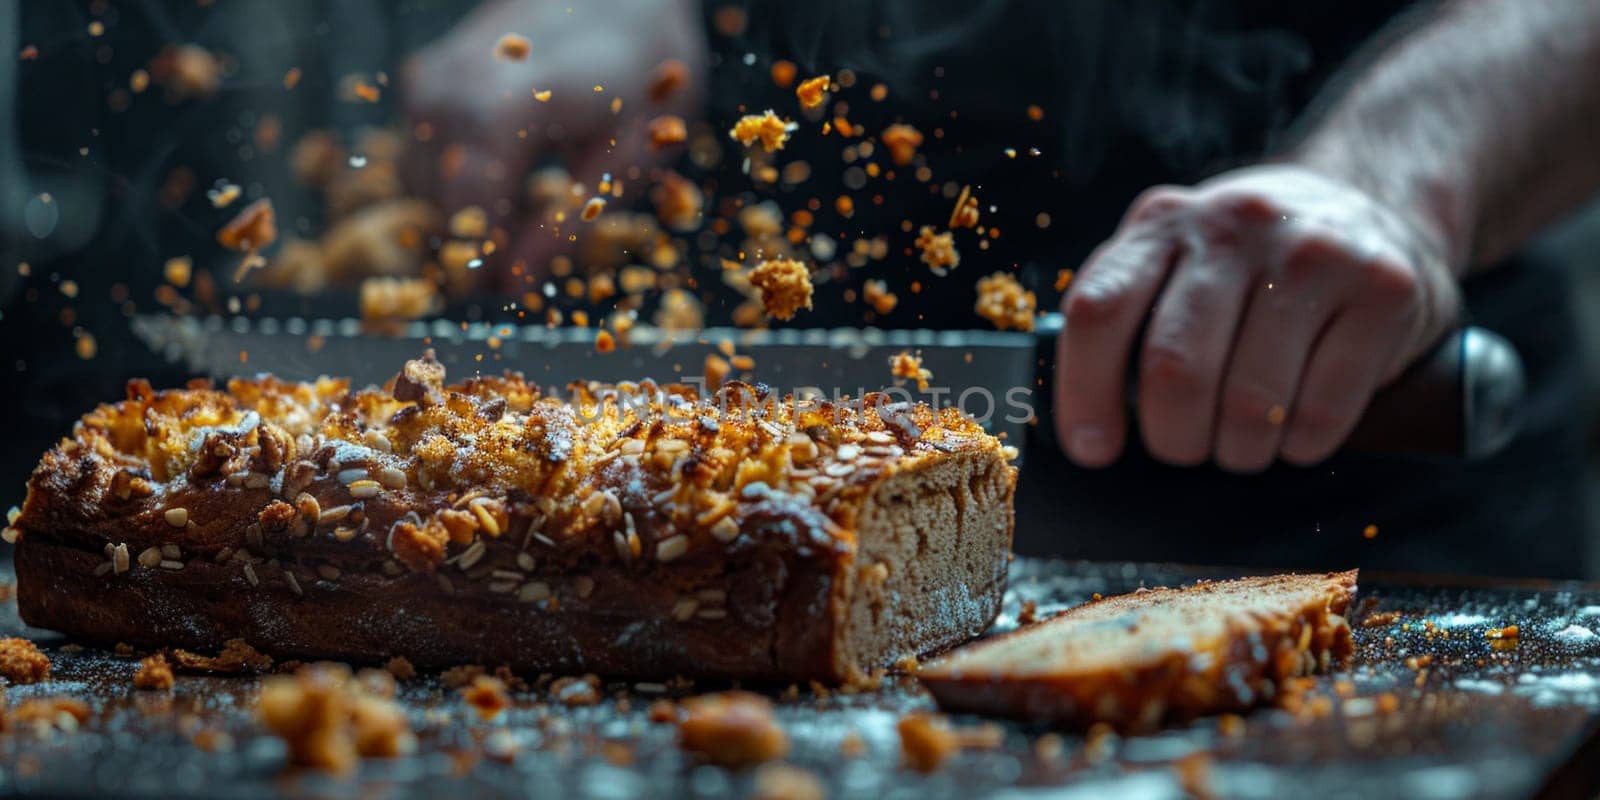 A skilled person delicately slices through a loaf of bread with a sharp knife, creating perfect slices for a meal or snack.